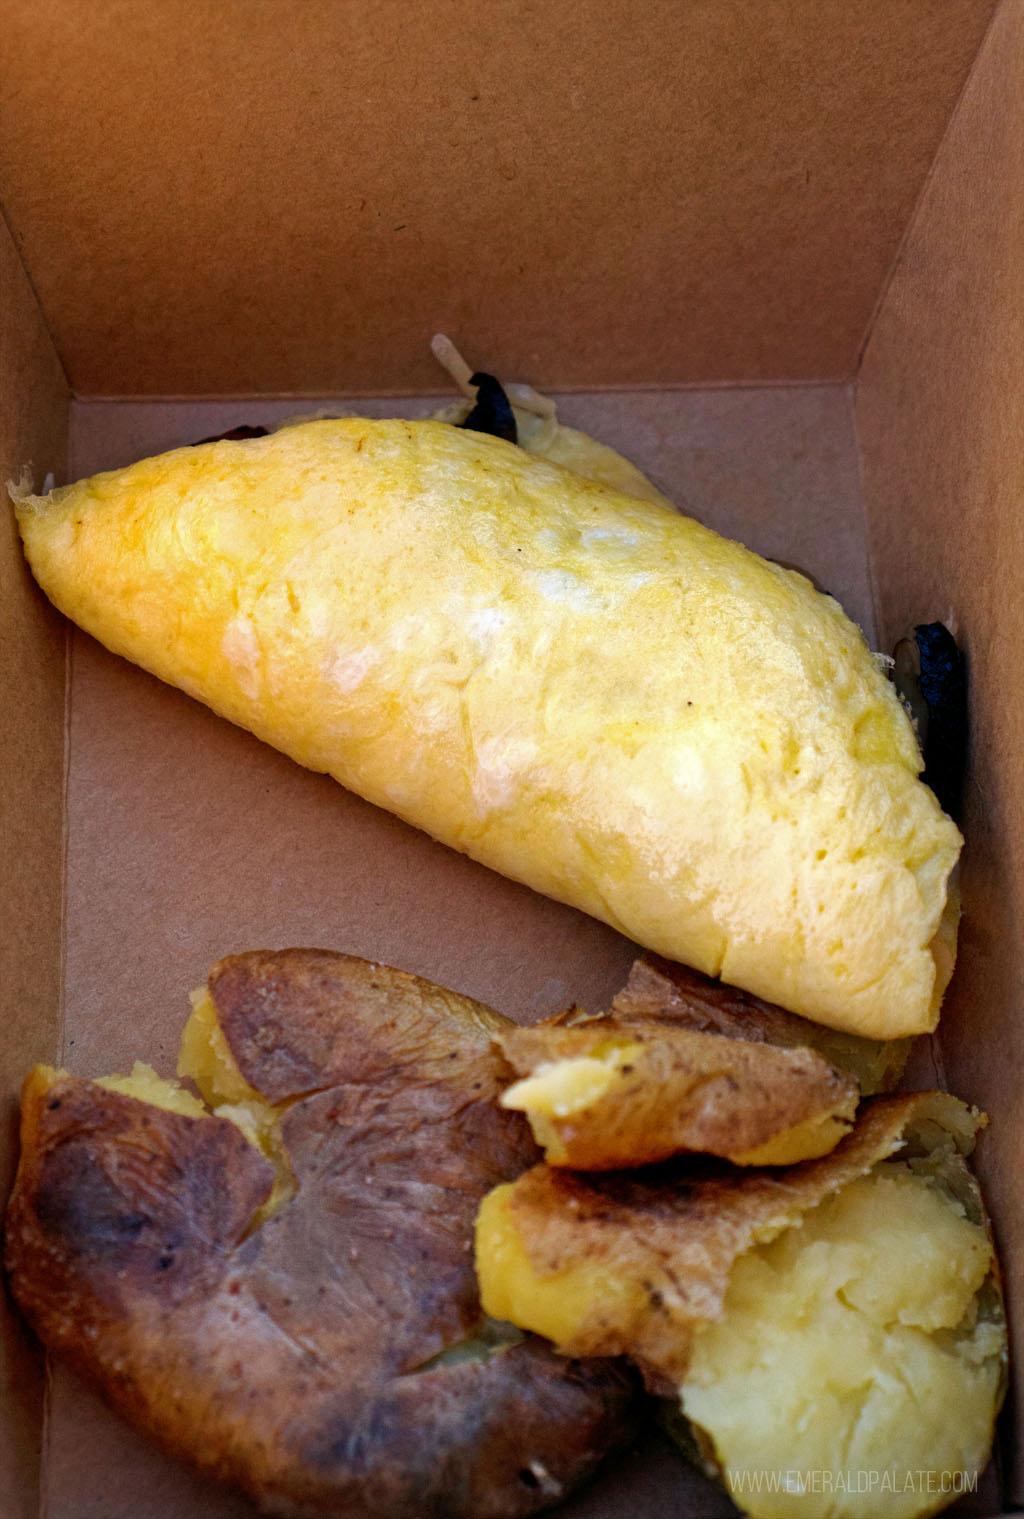 omelet and potatoes in a takeout container